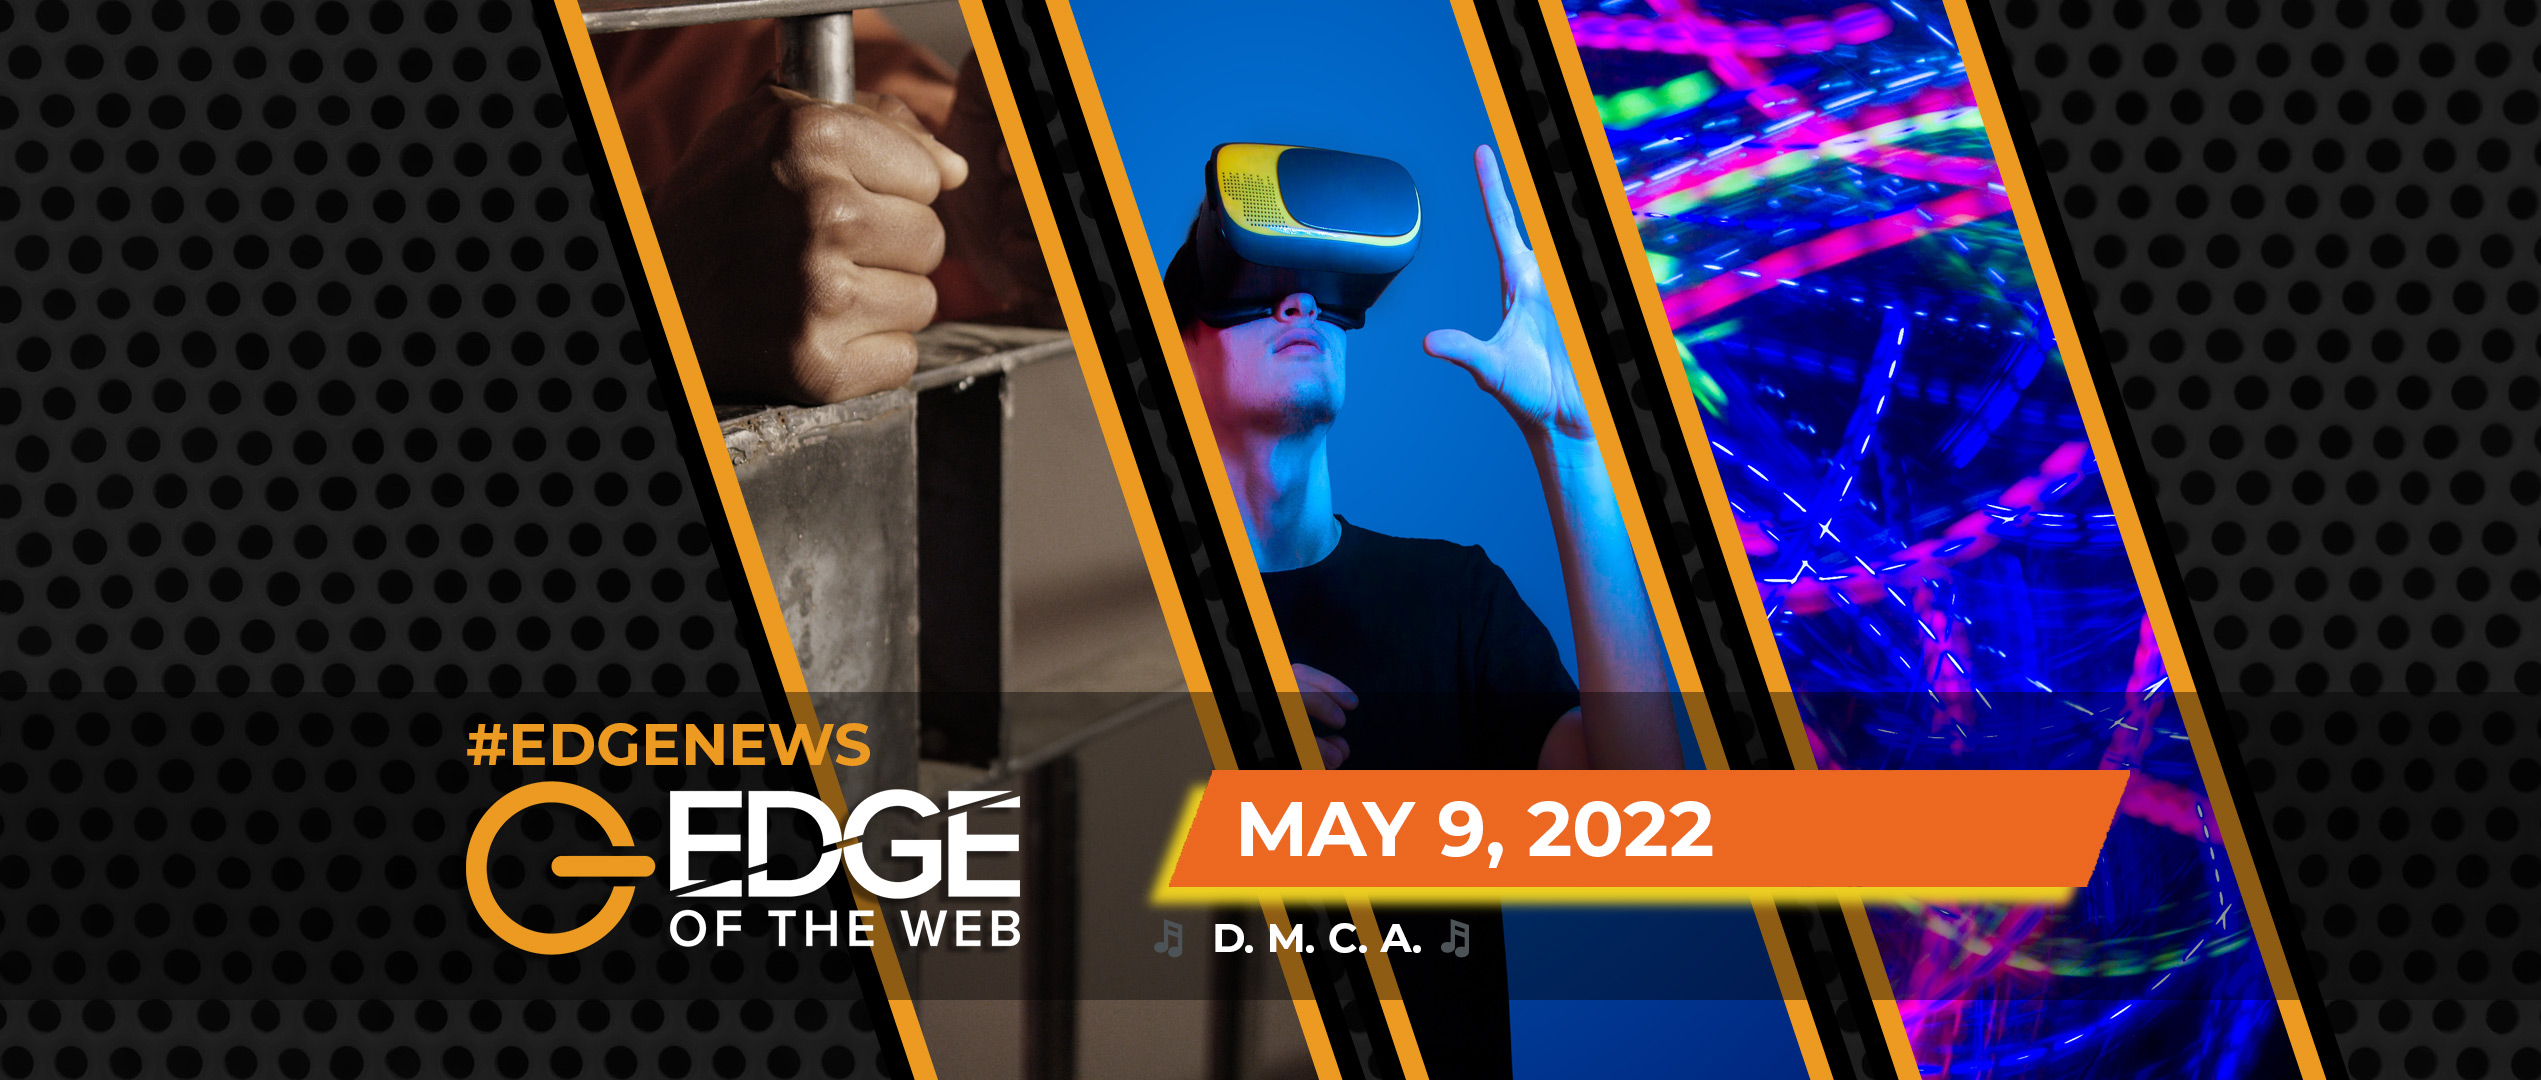 497 | News from the EDGE | Week of 5.9.2022